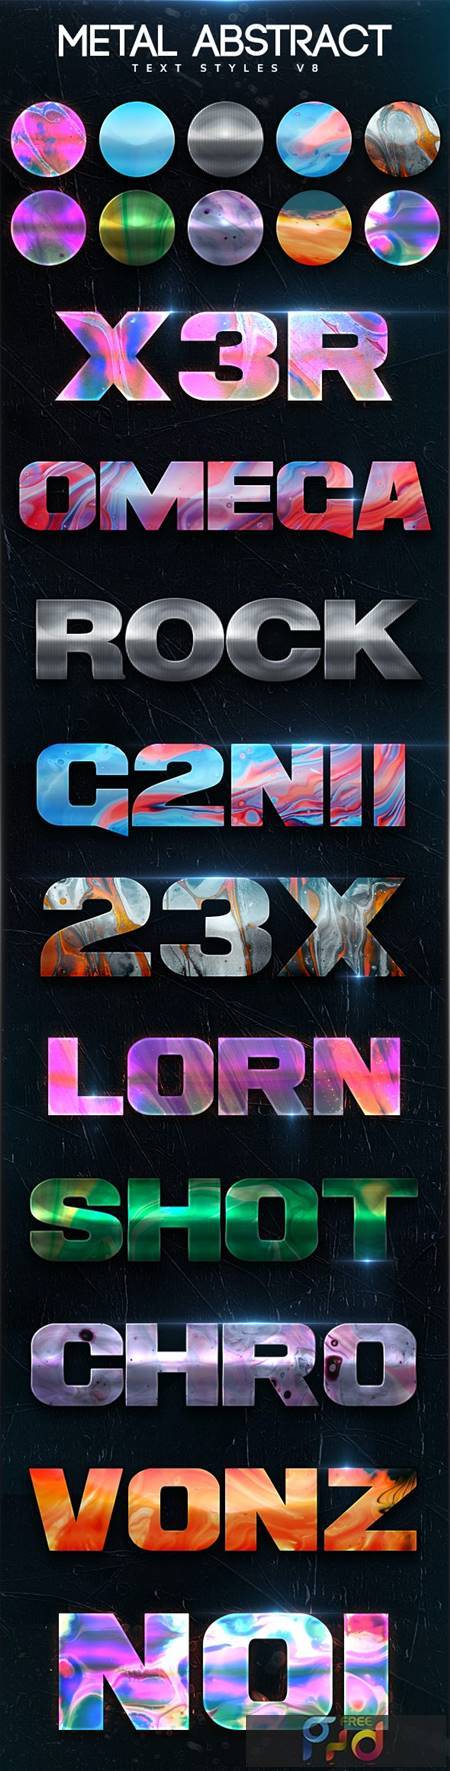 Metal Abstract Text Styles V8 26422140 1